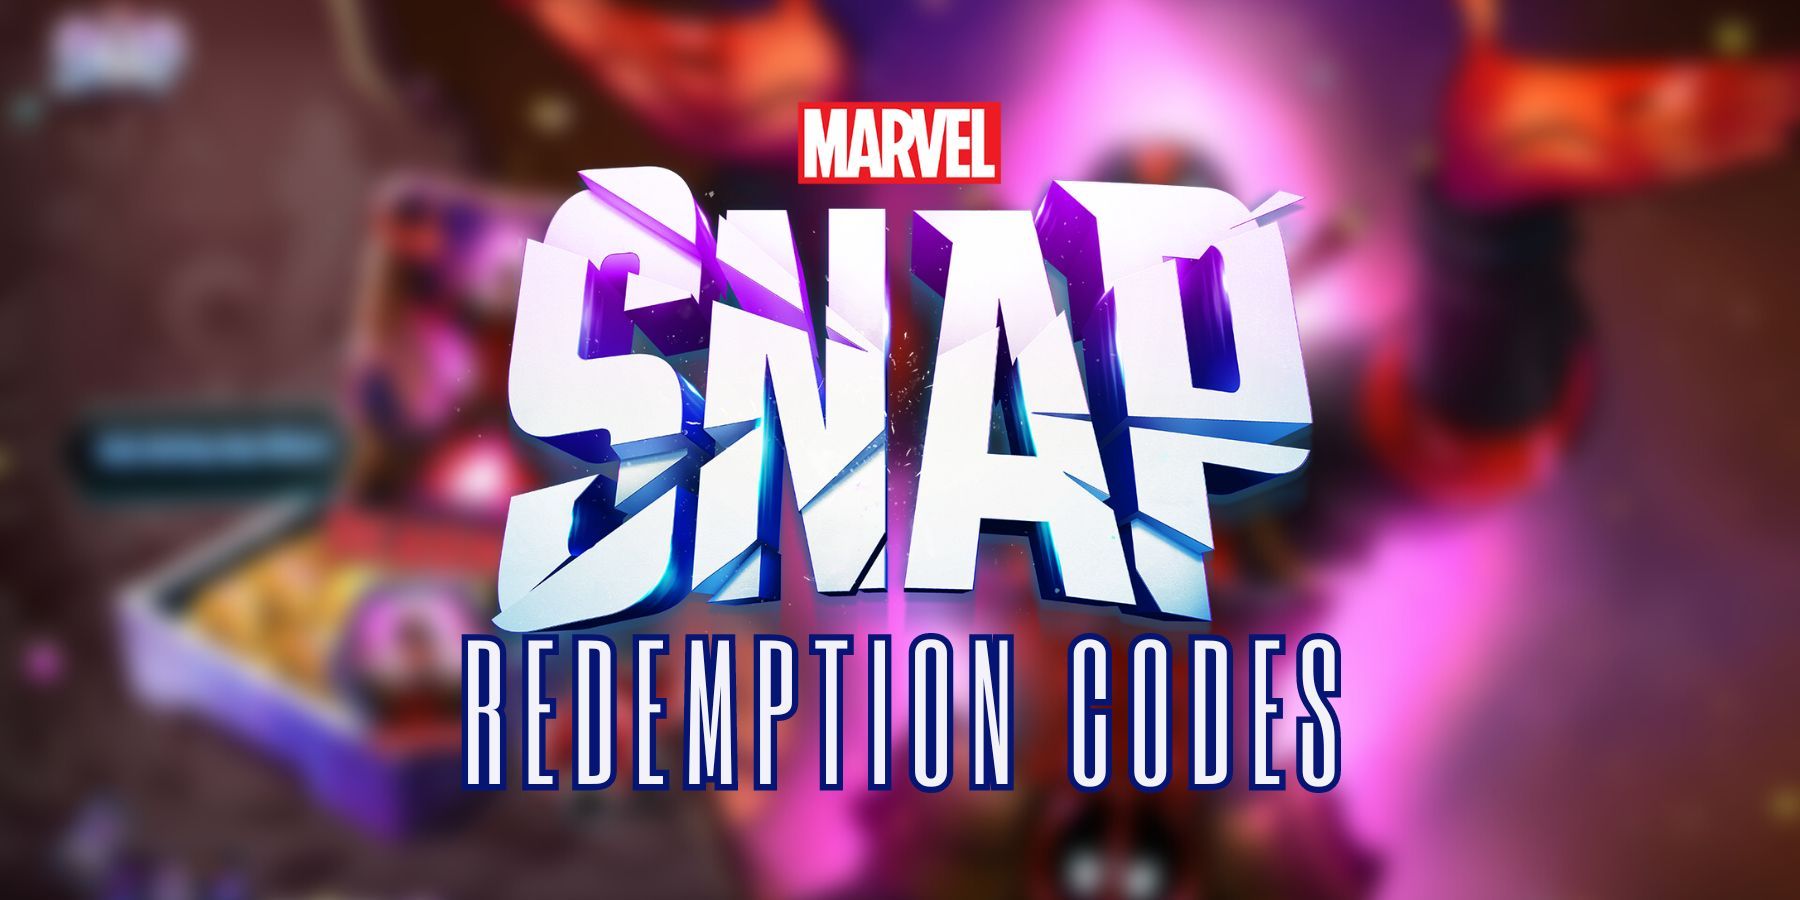 Marvel Snap Codes: Does Marvel Snap Have Free Codes? - GINX TV